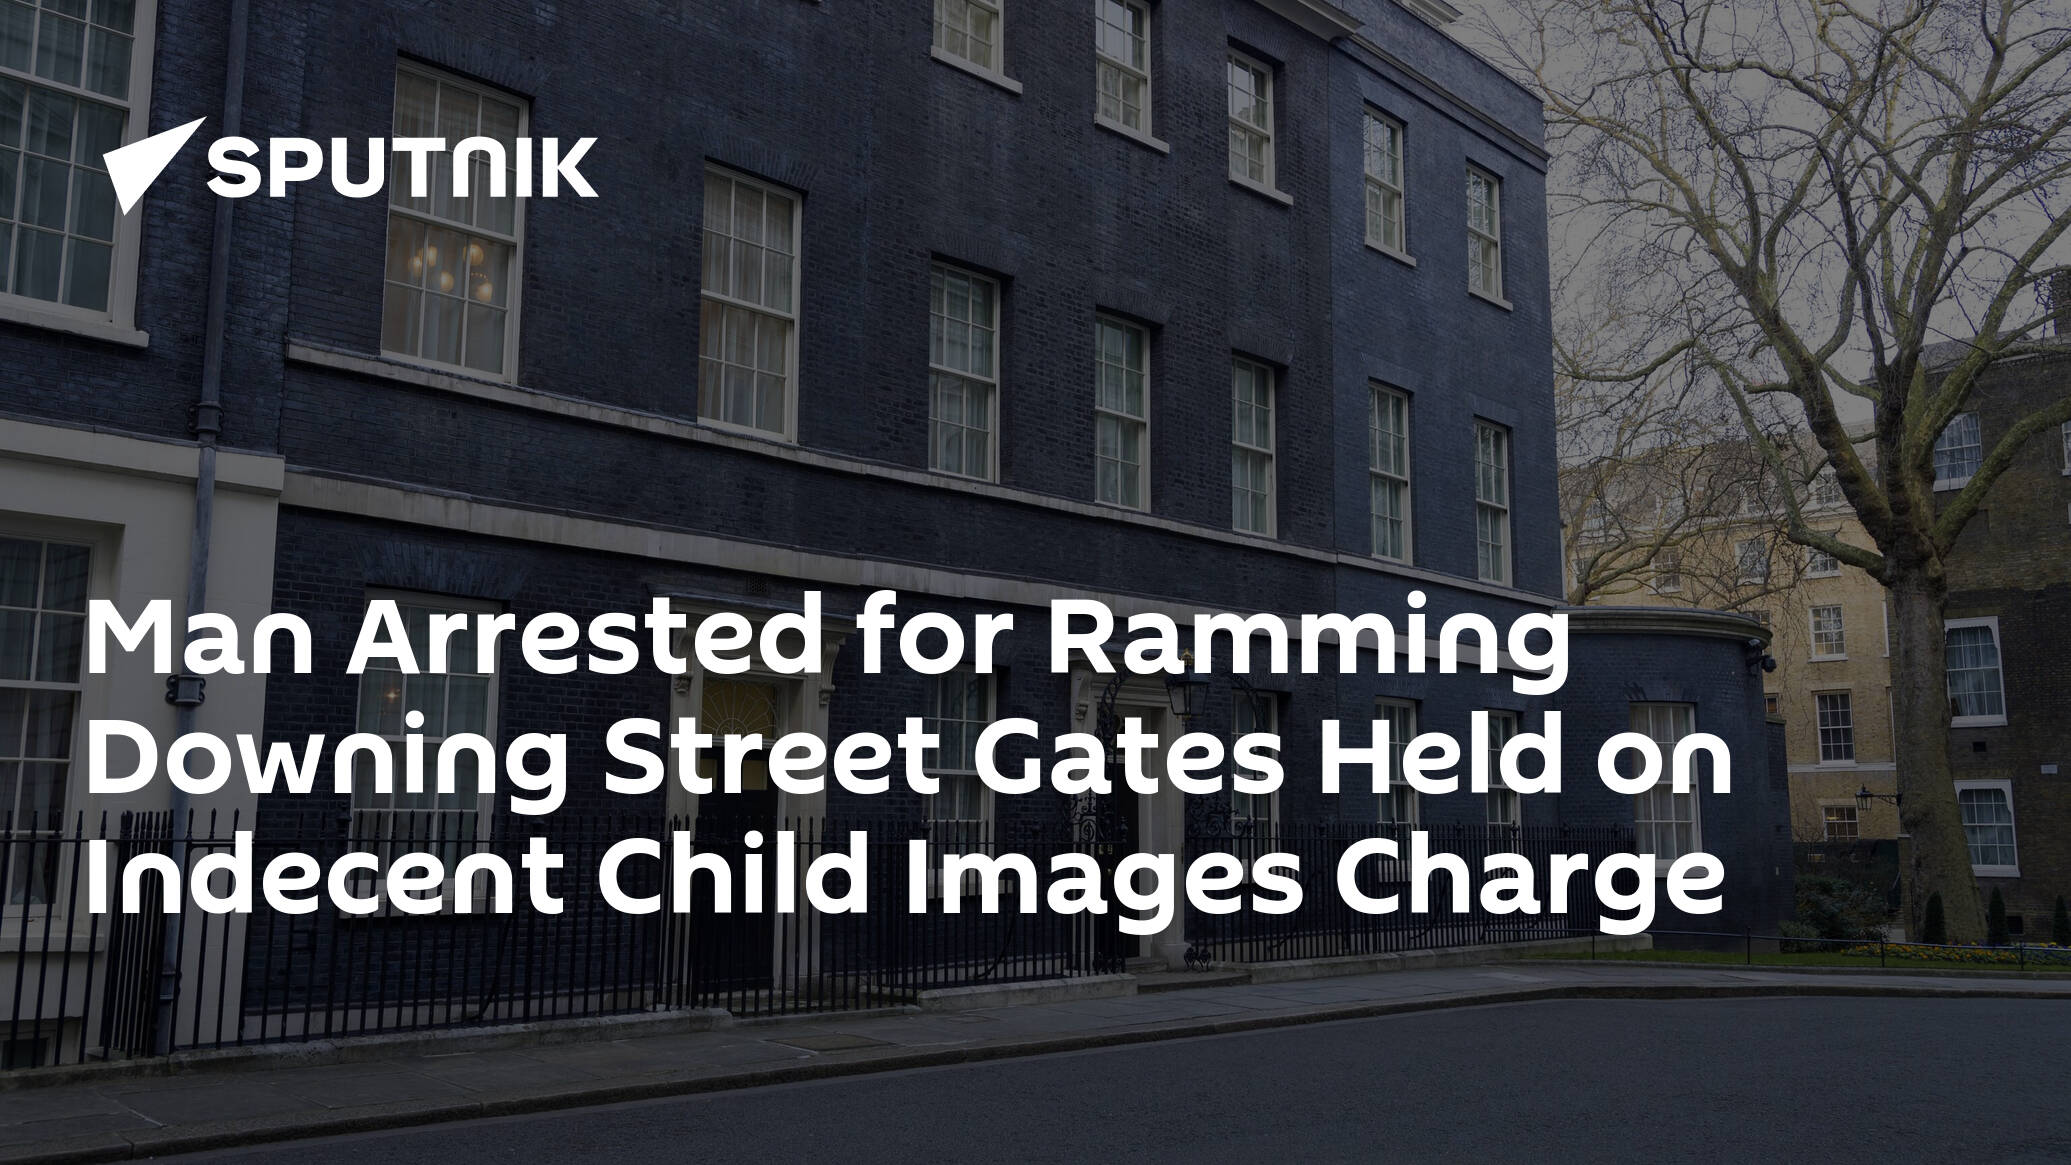 Man Arrested for Ramming Downing Street Gates Held on Indecent Child Images Charge